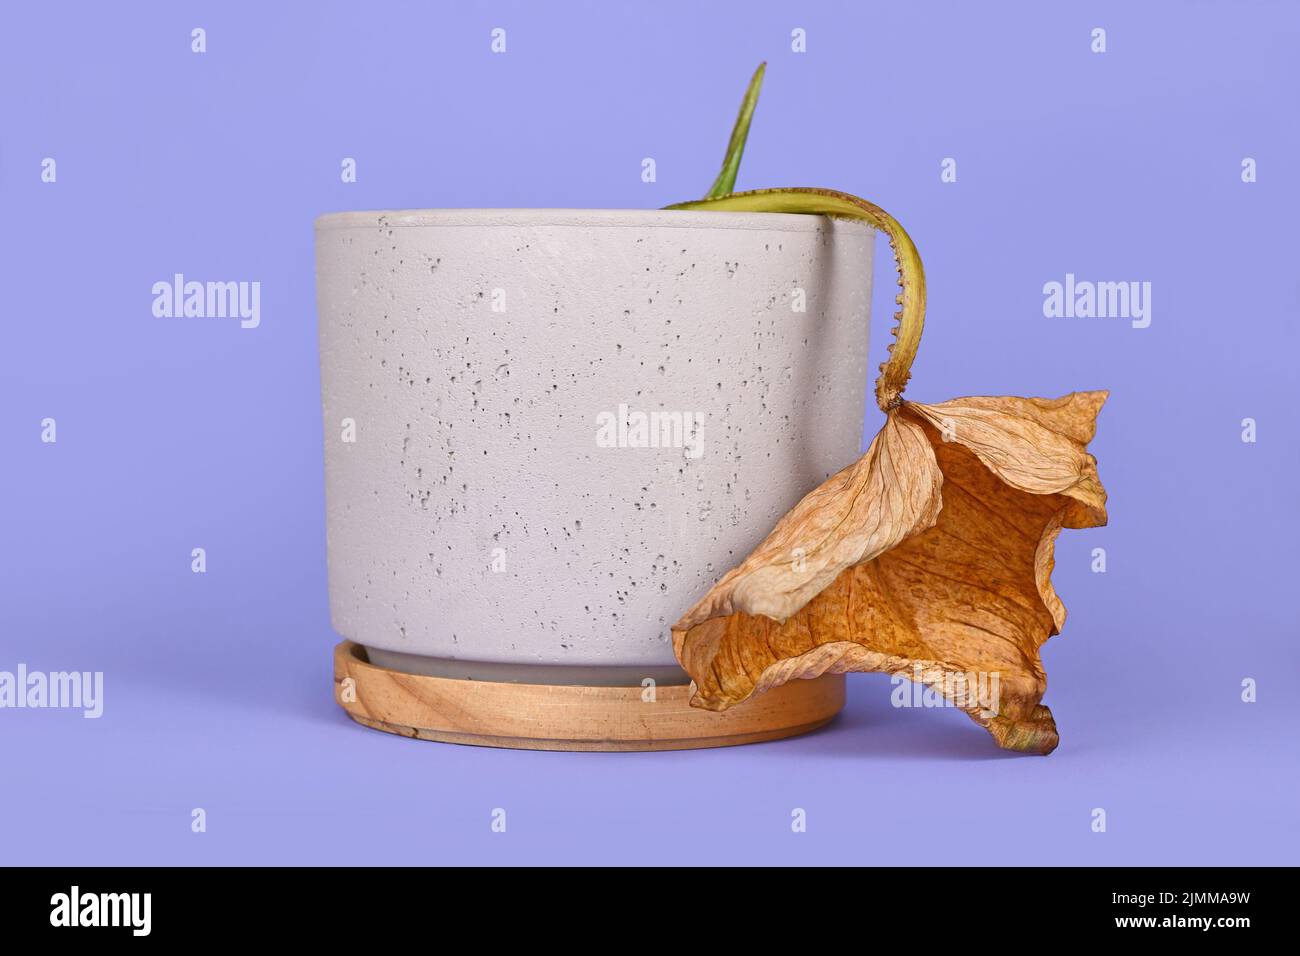 Dying houseplant with hanging dry leaf in flower pot on ciolet background Stock Photo